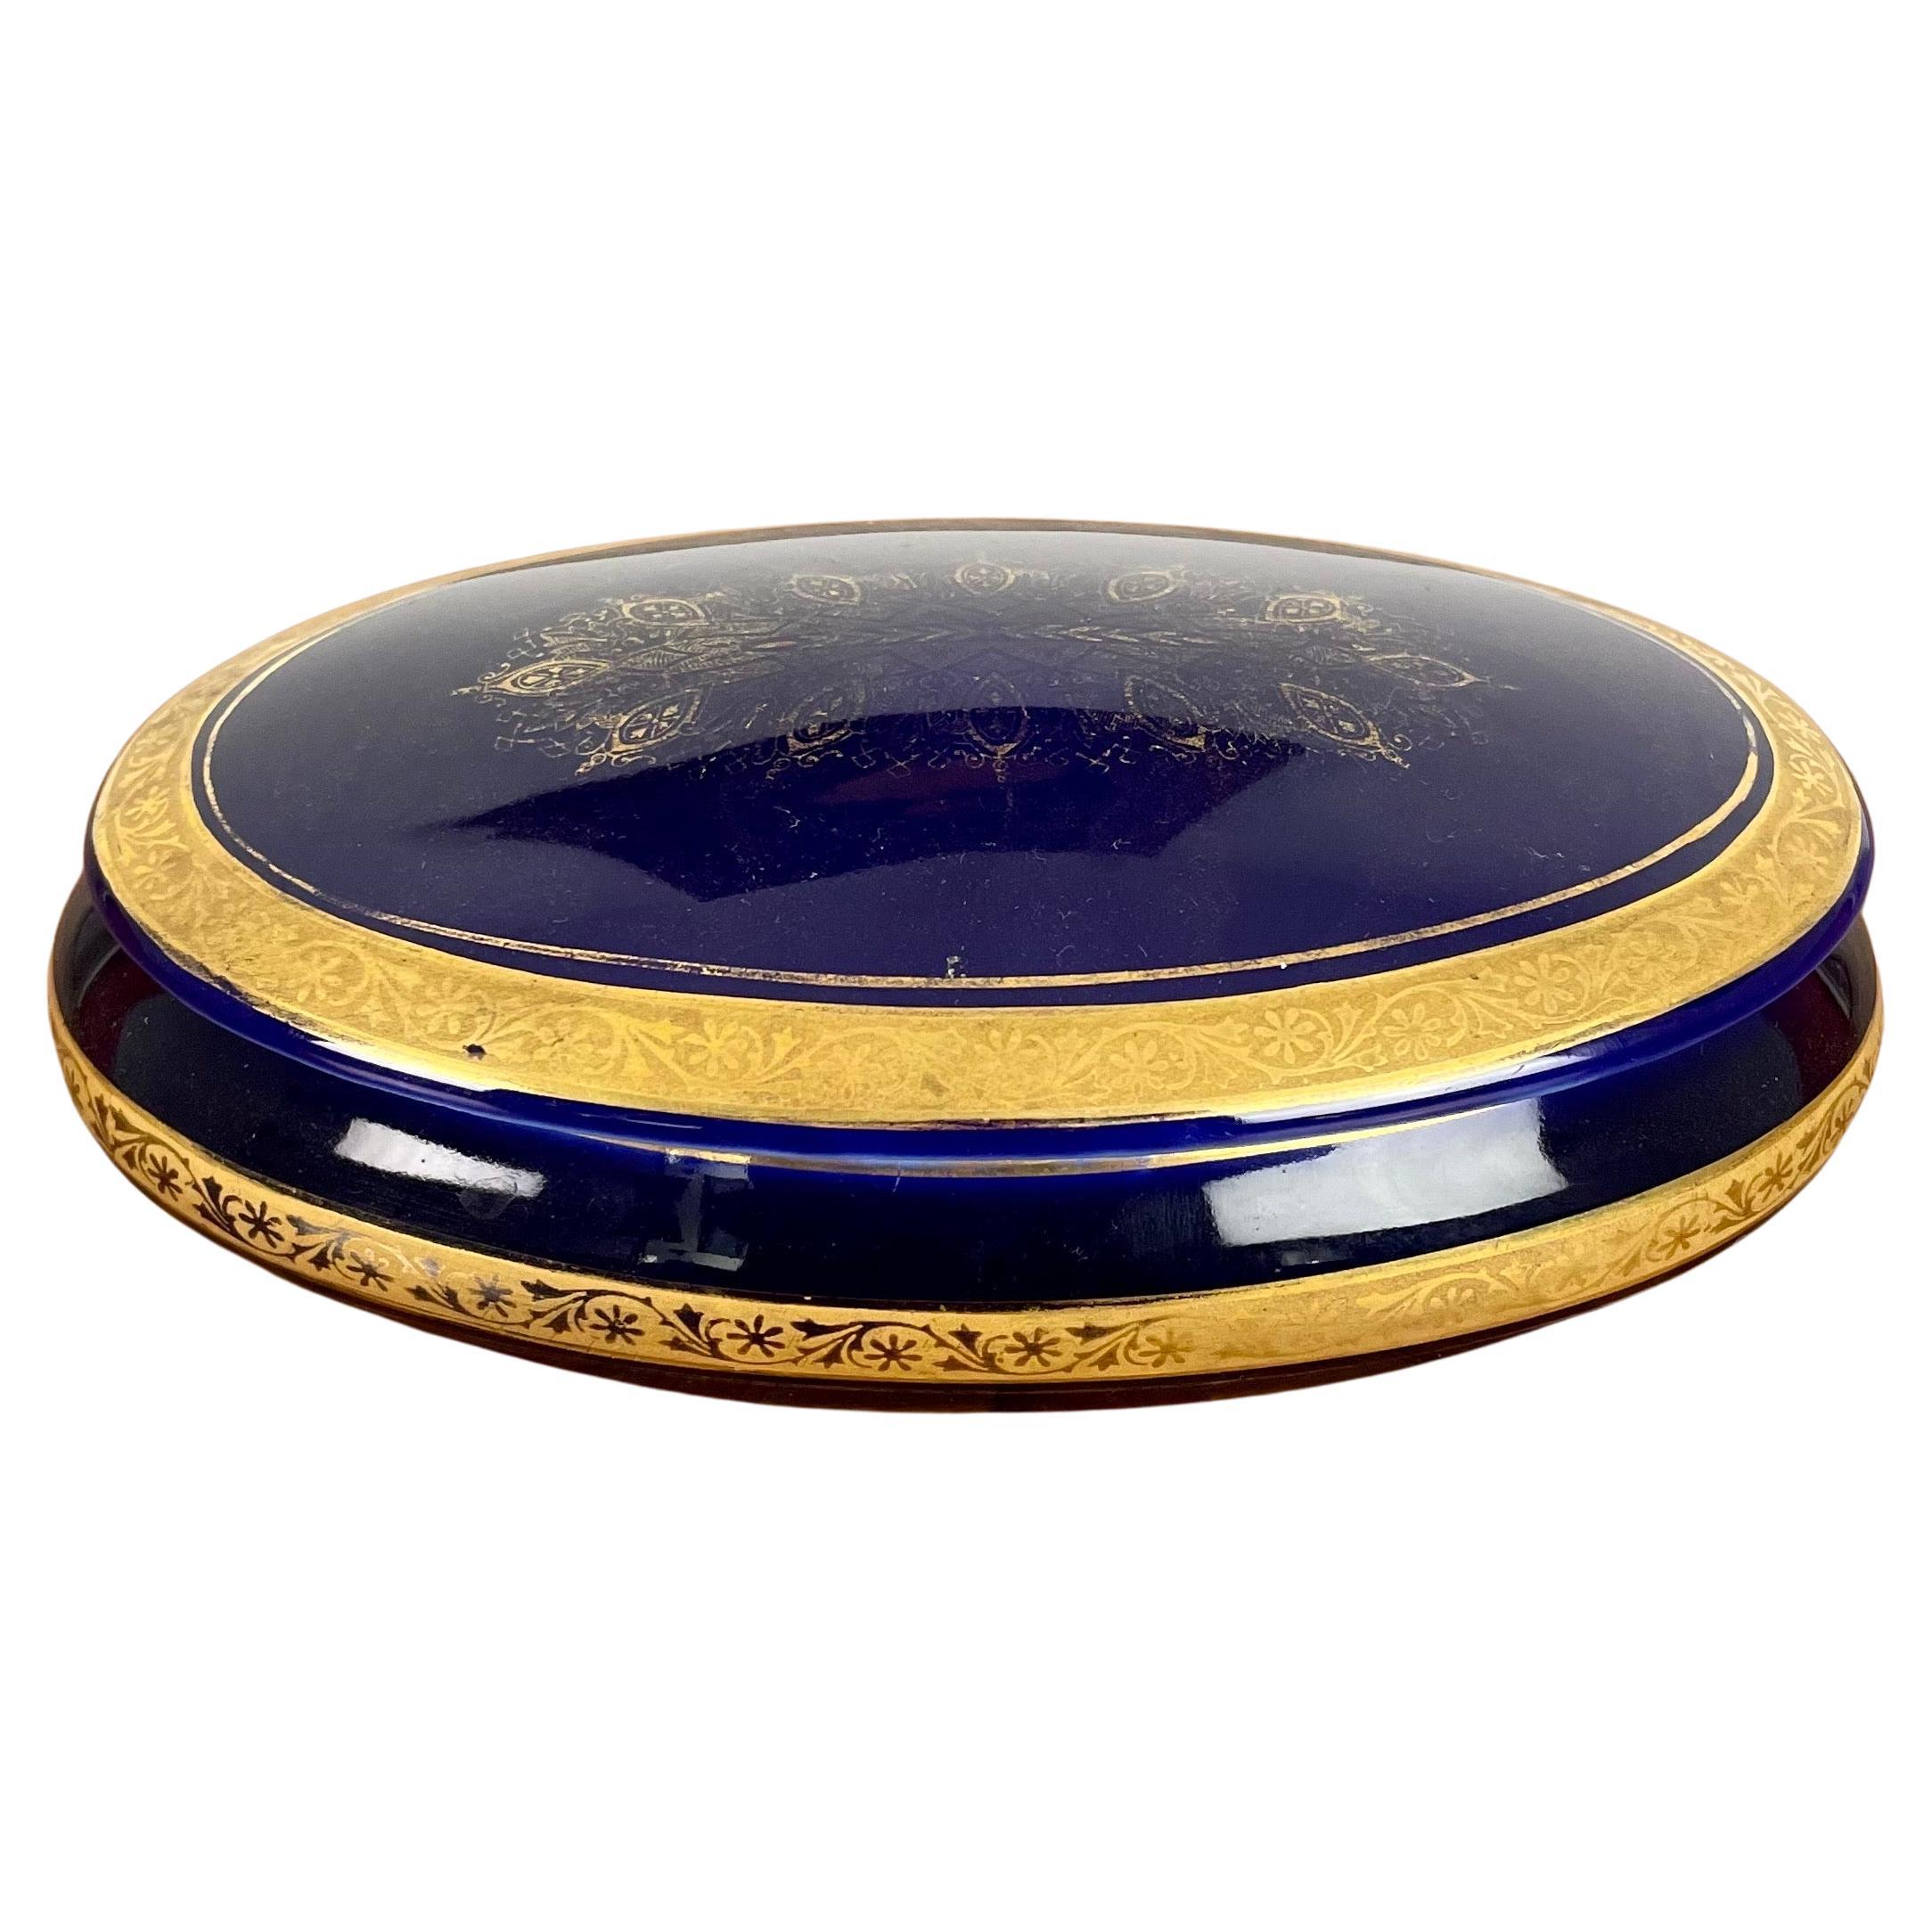 Cobalt blue and gold porcelain box from Limoges, France circa 1955/60